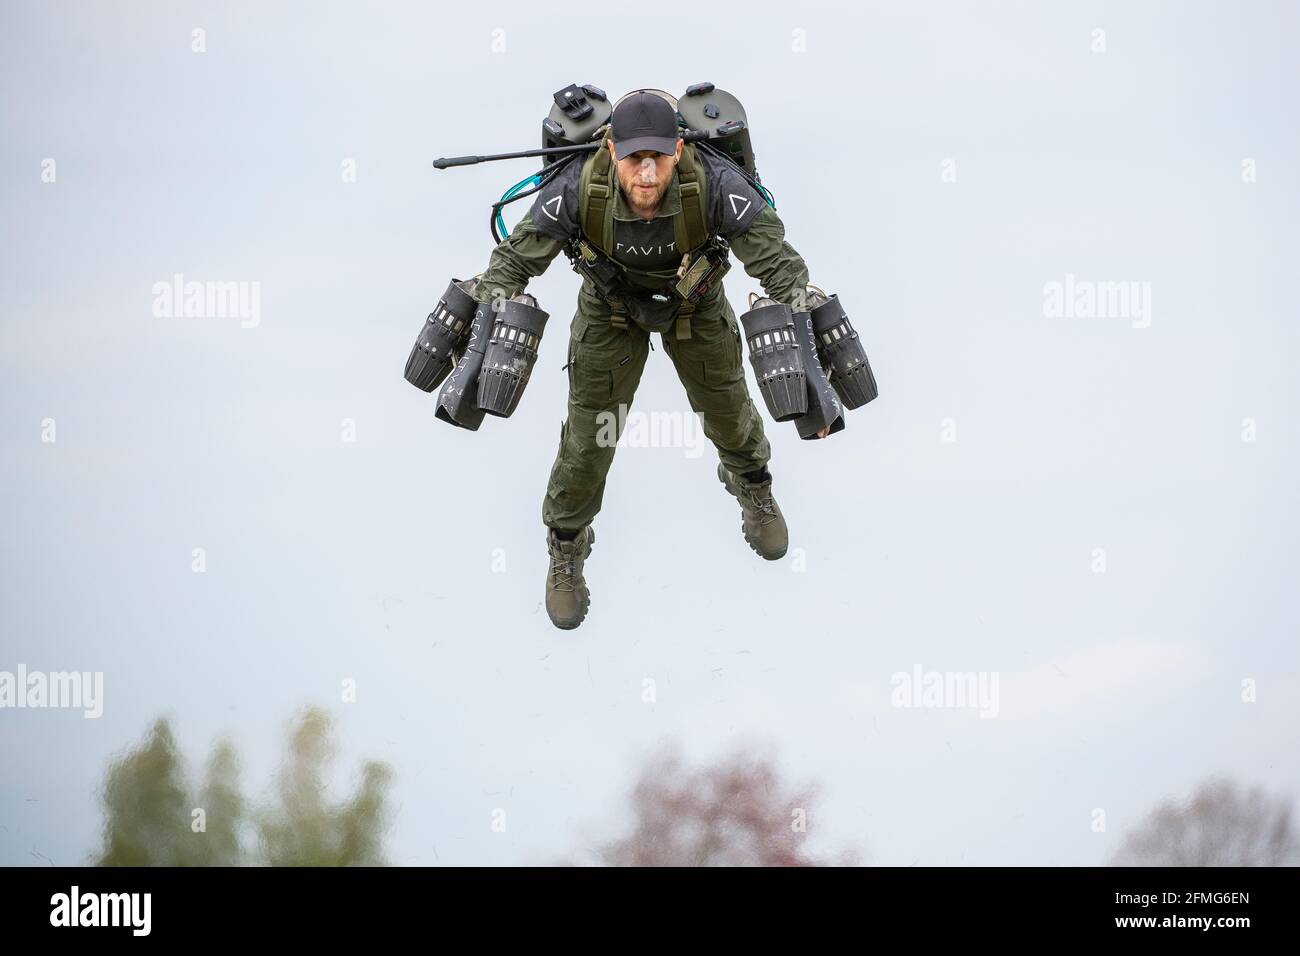 Richard Browning, founder of Gravity Industries, takes flight in his body-controlled jet-powered suit at Old Sarum Airfield, Salisbury, Wiltshire. Stock Photo